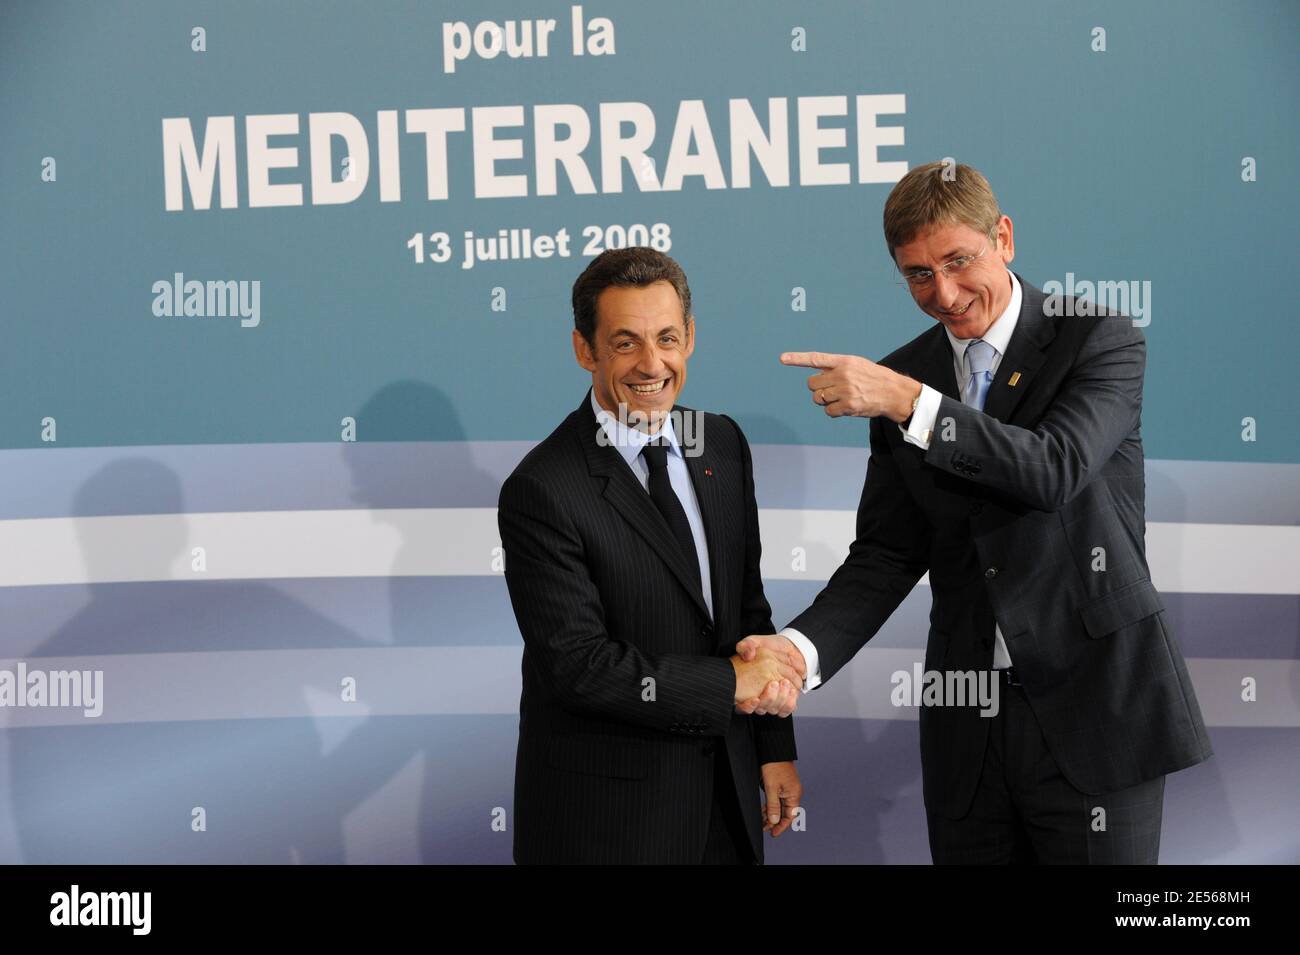 French President Nicolas Sarkozy welcomes Hungary's Prime minister Ferenc Gyurcsany at opening of the Paris' Union for the Mediterranean founding summit at the Grand Palais in Paris, France on July 13, 2008. French President Nicolas Sarkozy and 42 leaders launch today a union between Europe and its Mediterranean neighbours but tensions among Middle East countries could undermine the grand plan. Photo by Benainous-Hounsfield/Pool/ABACAPRESS.COM Stock Photo